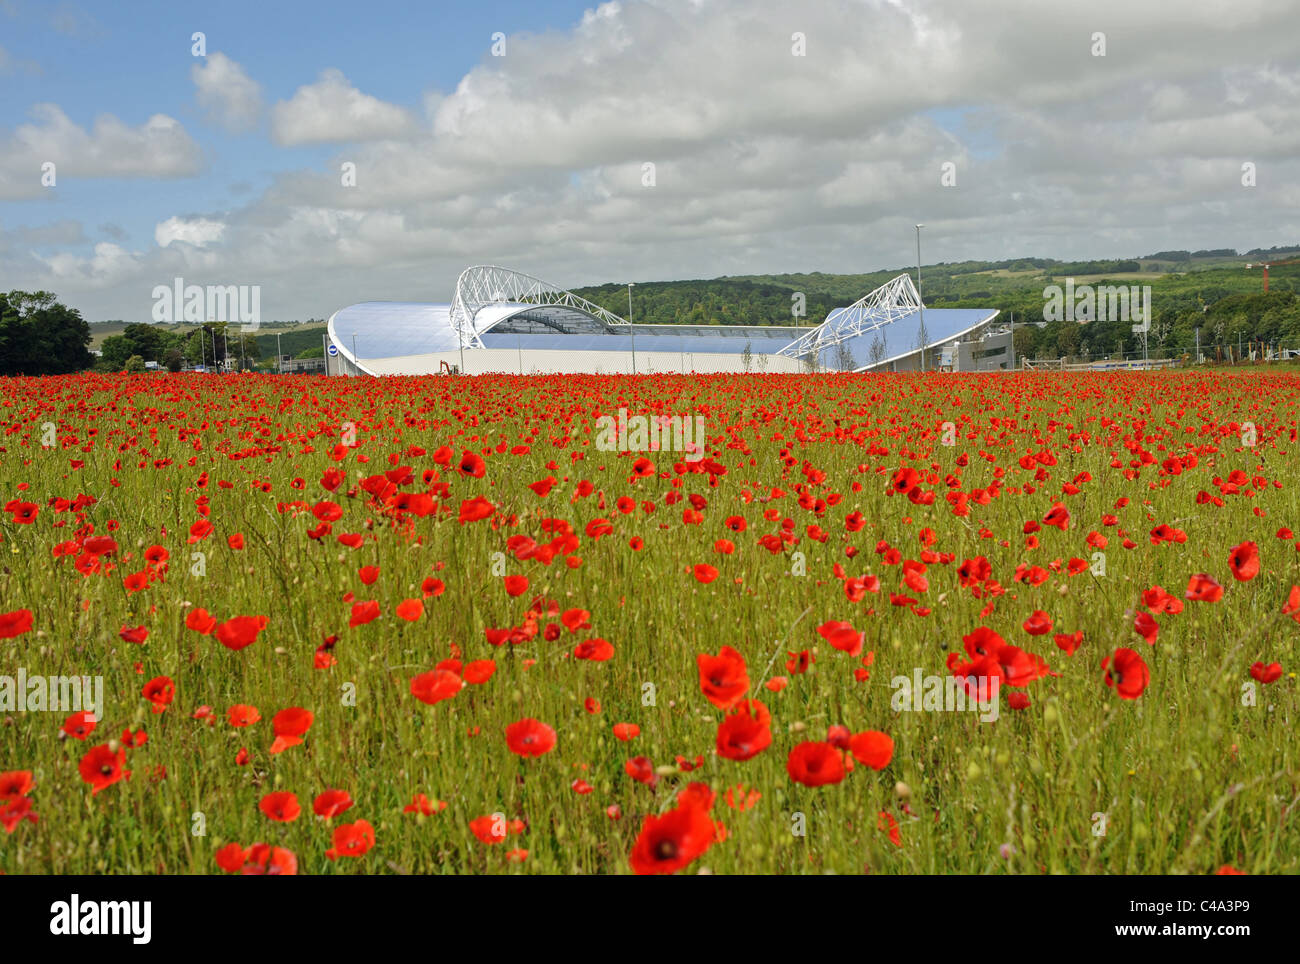 Brighton and Hove Albion's new American Express Community Stadium known as The Amex rises beyond a field of red poppies Stock Photo